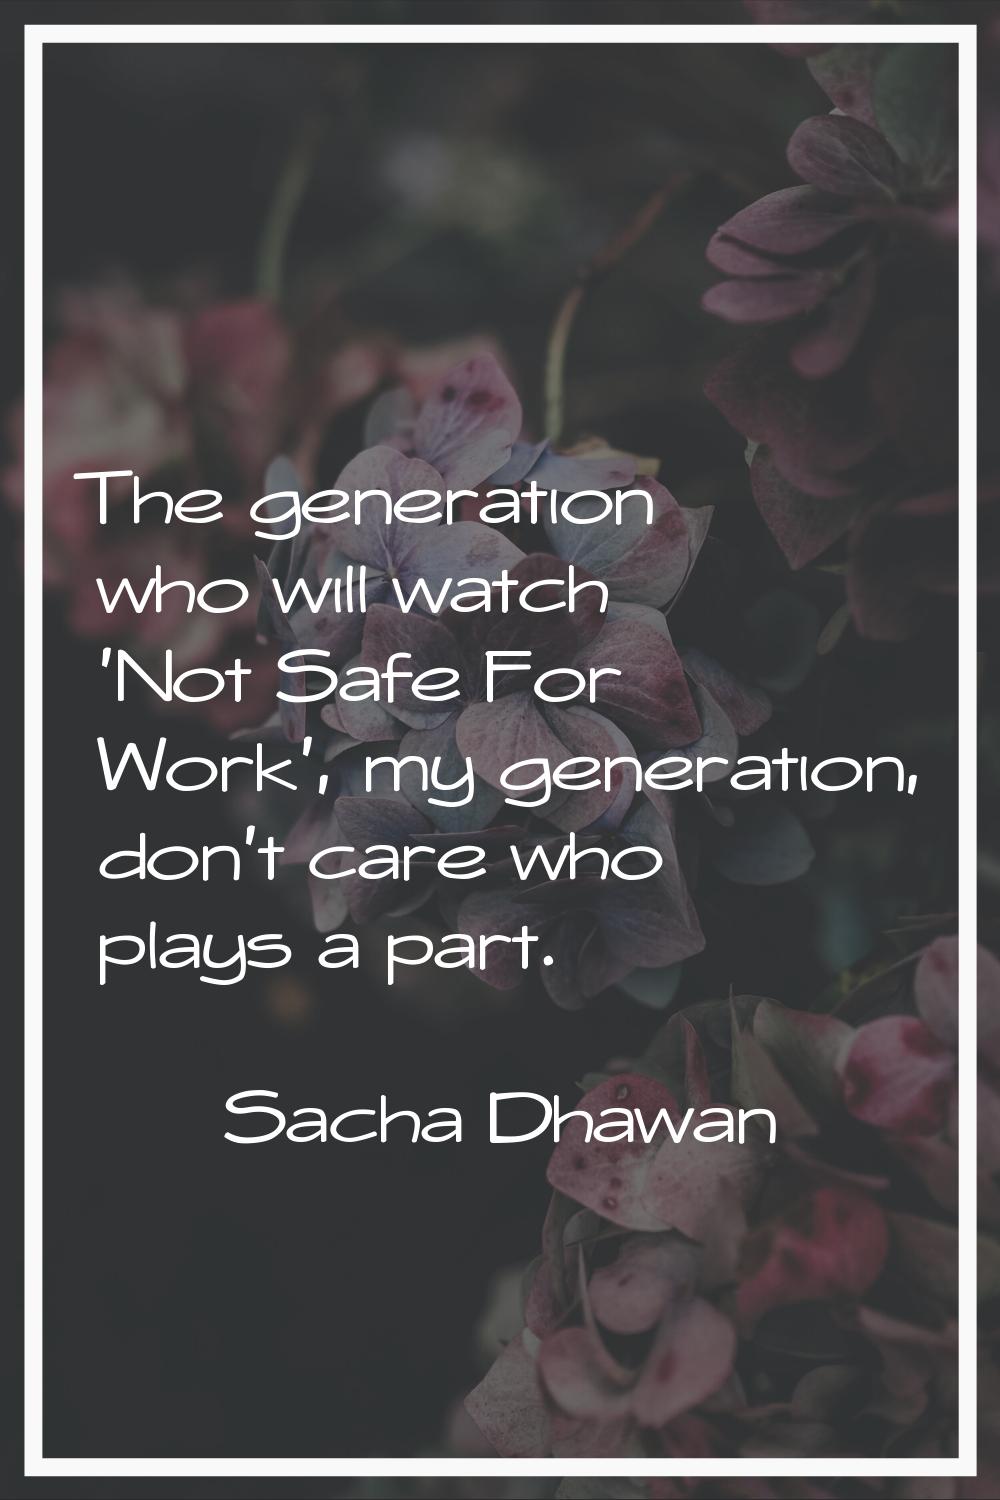 The generation who will watch 'Not Safe For Work', my generation, don't care who plays a part.